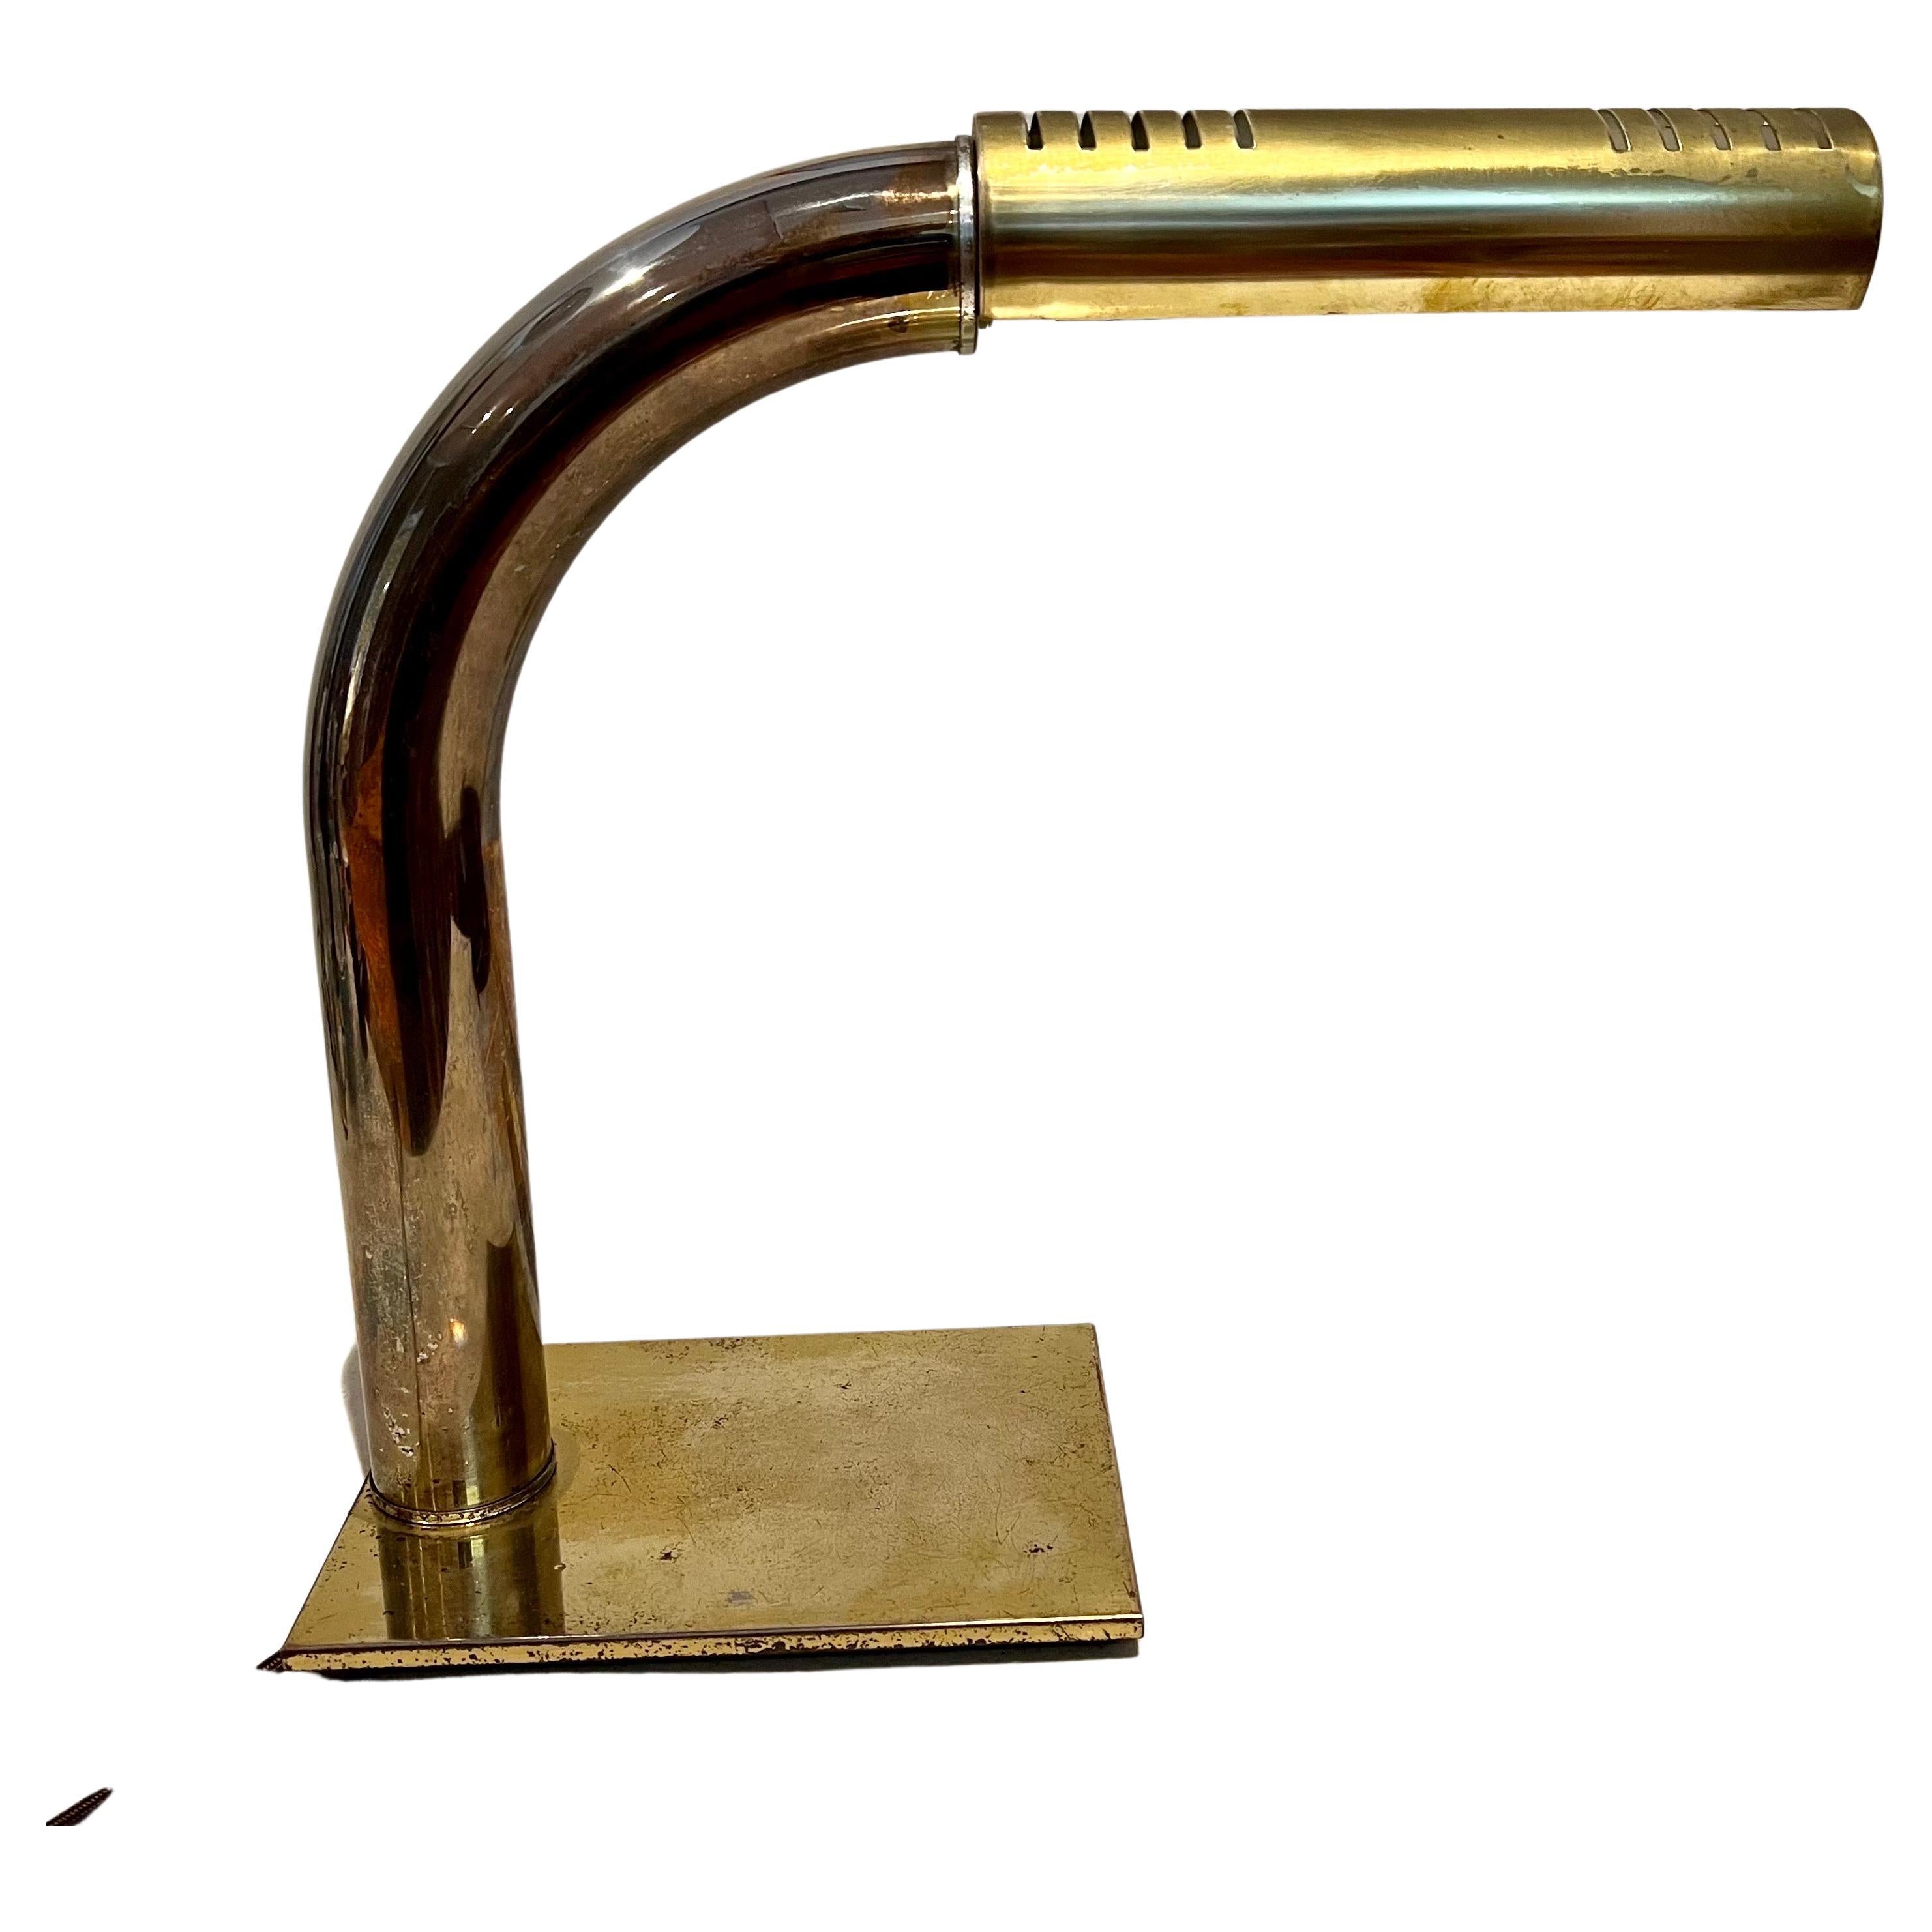 A very rare patinated brass & chrome table desk lamp designed by Jim Bindman for Rainbow lamp company, we have rewired and polished the lamp it shows wear on the finish due to age, it can be professionally polished but we are selling it with its